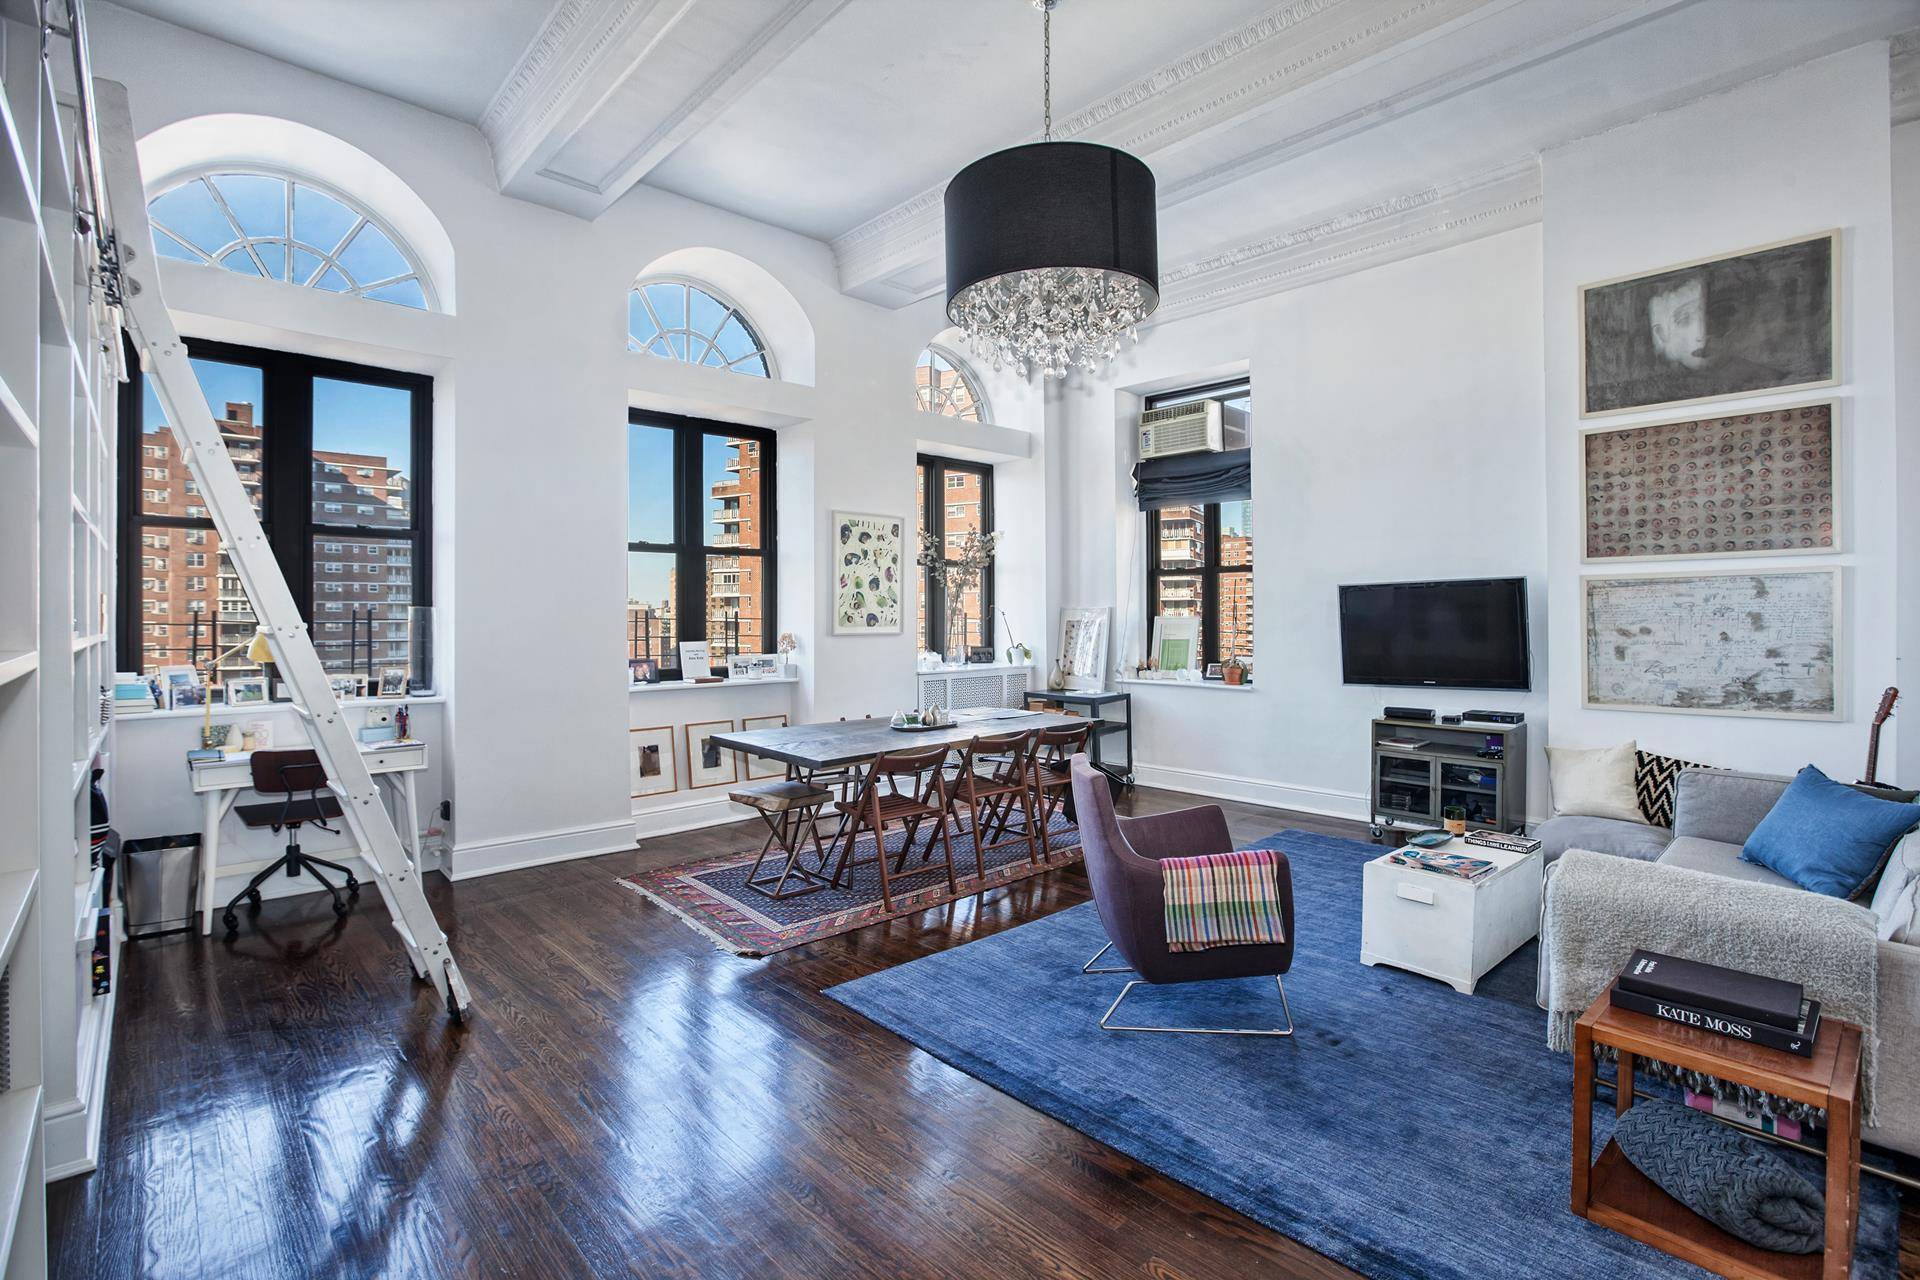 Enjoy the sunset daily at this one of a kind loft style home in Chelsea.